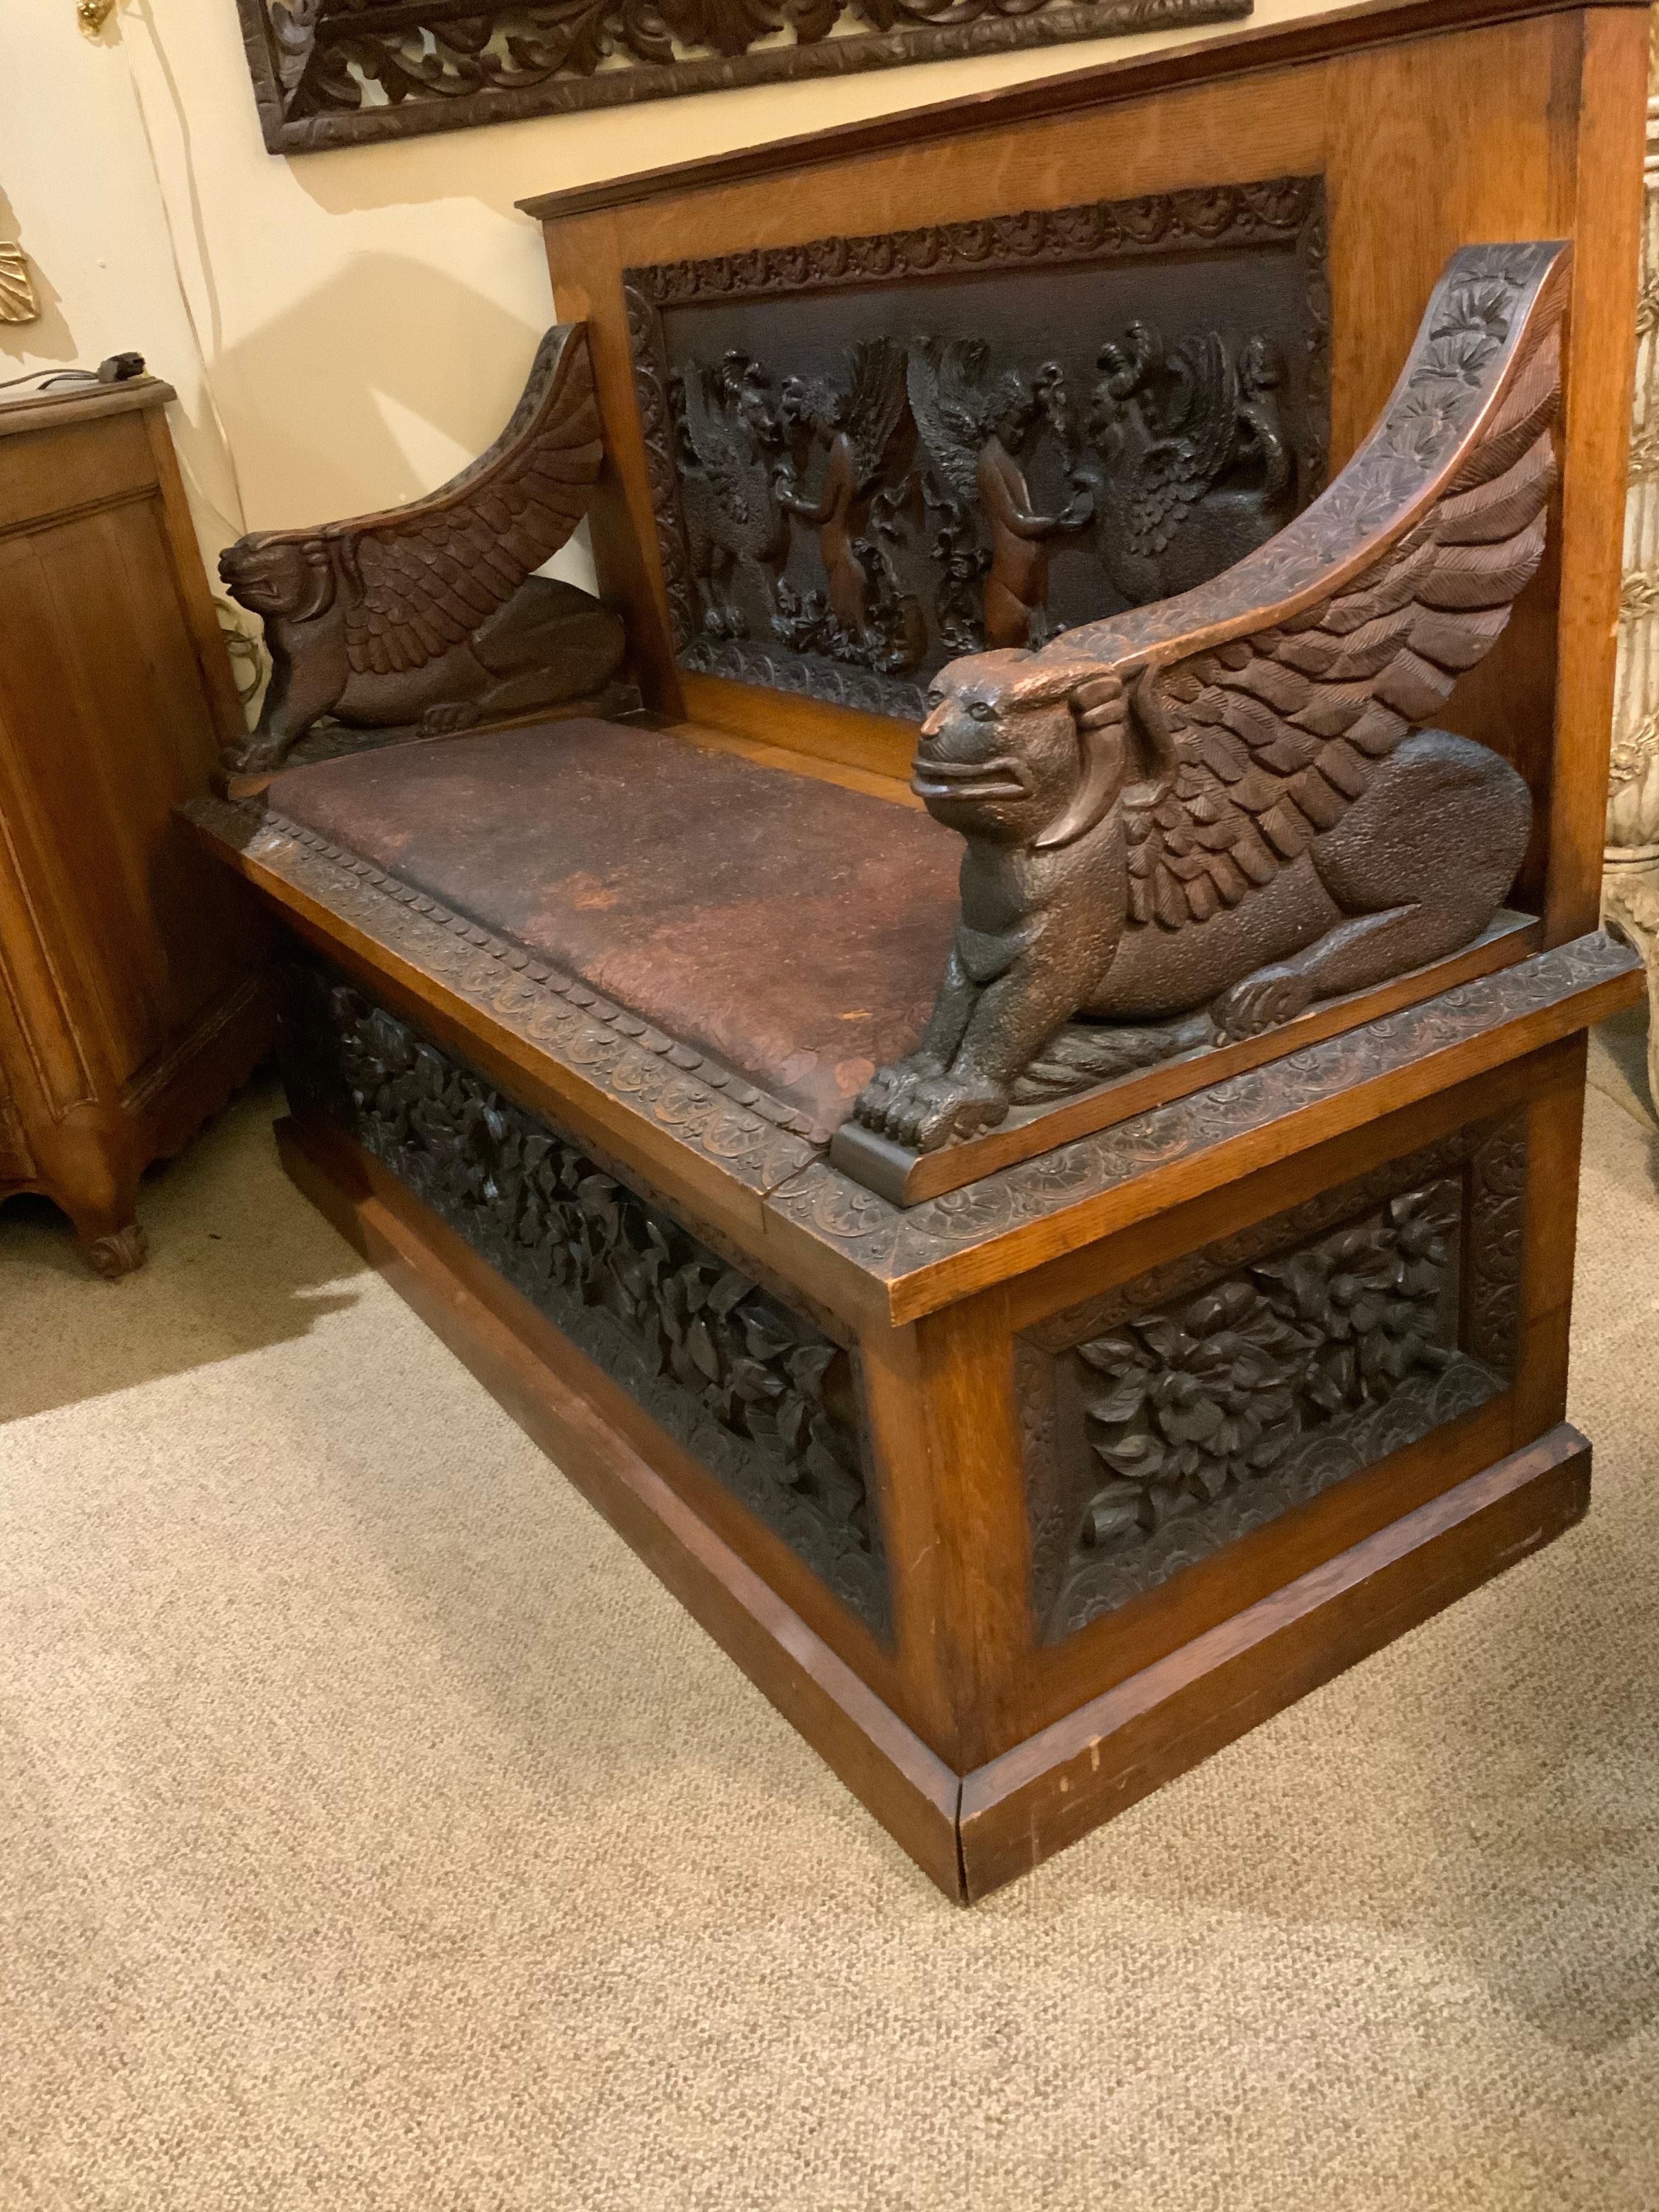 Renaissance Revival French Renaissance Style Heavily Carved Bench with Griffins and Angels